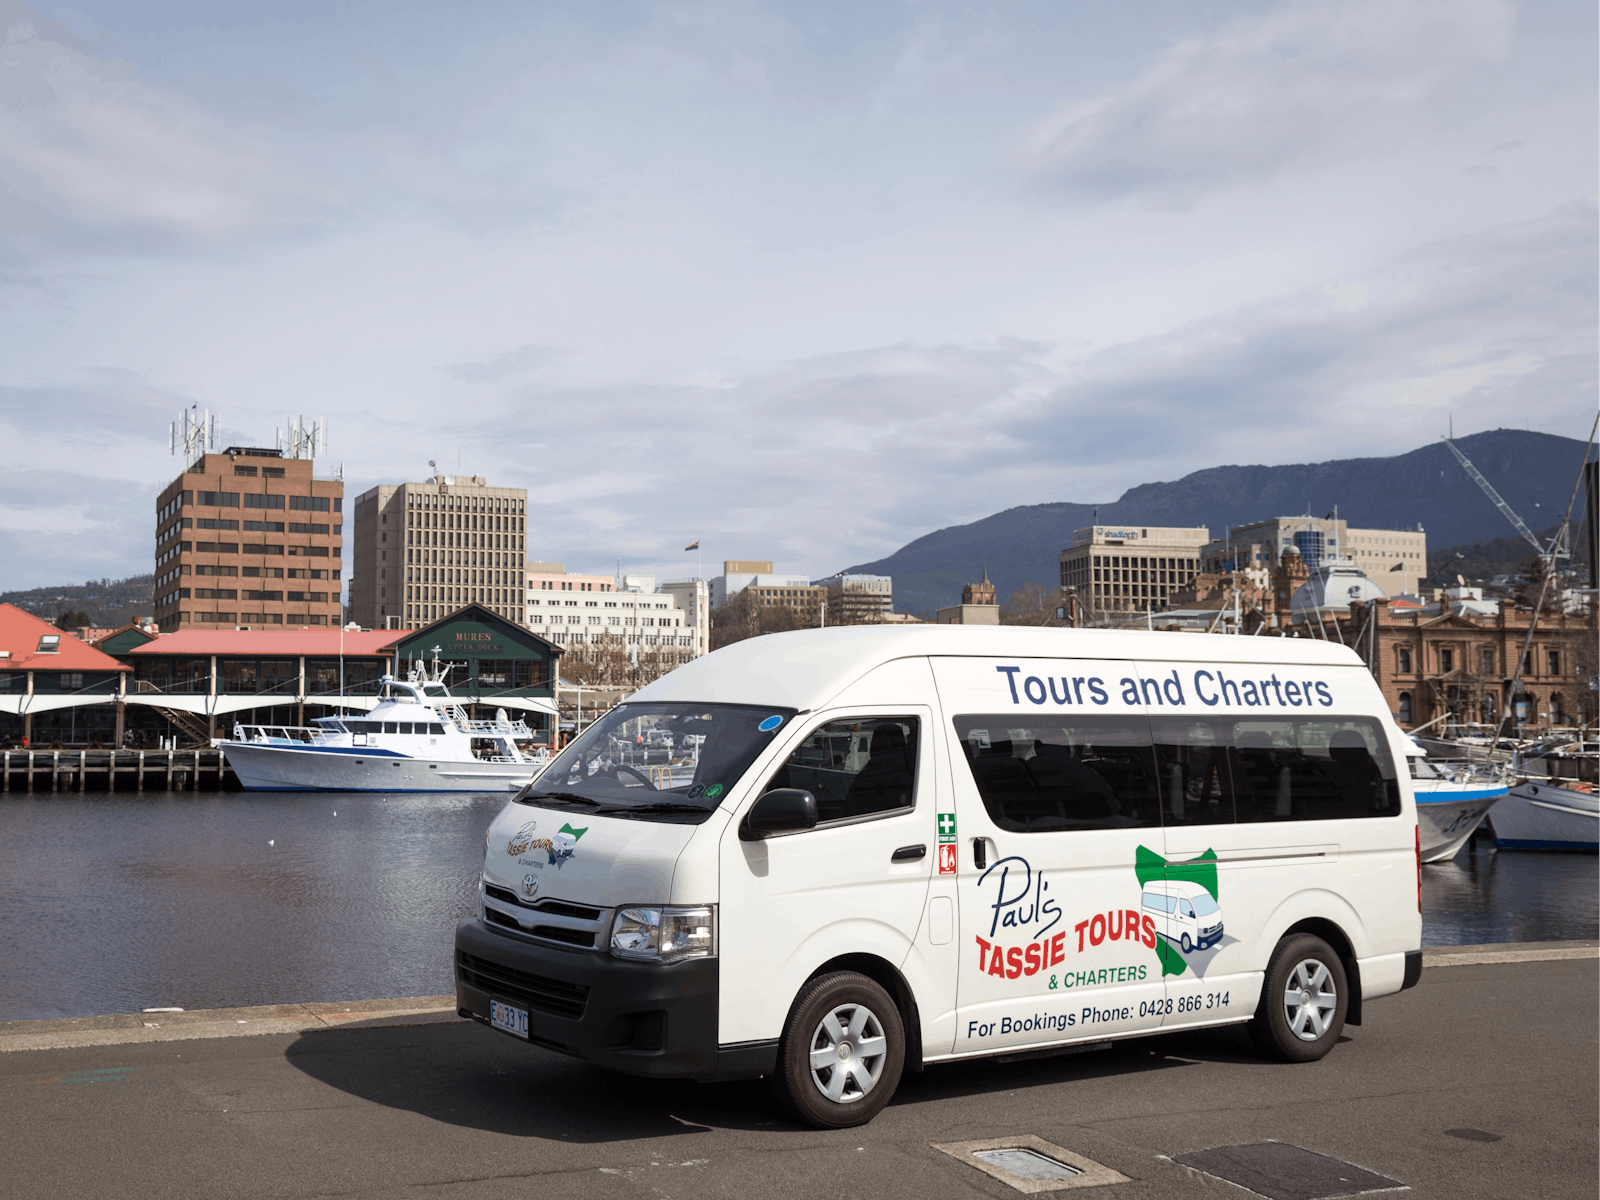 Pauls Tassie Tours and Charters